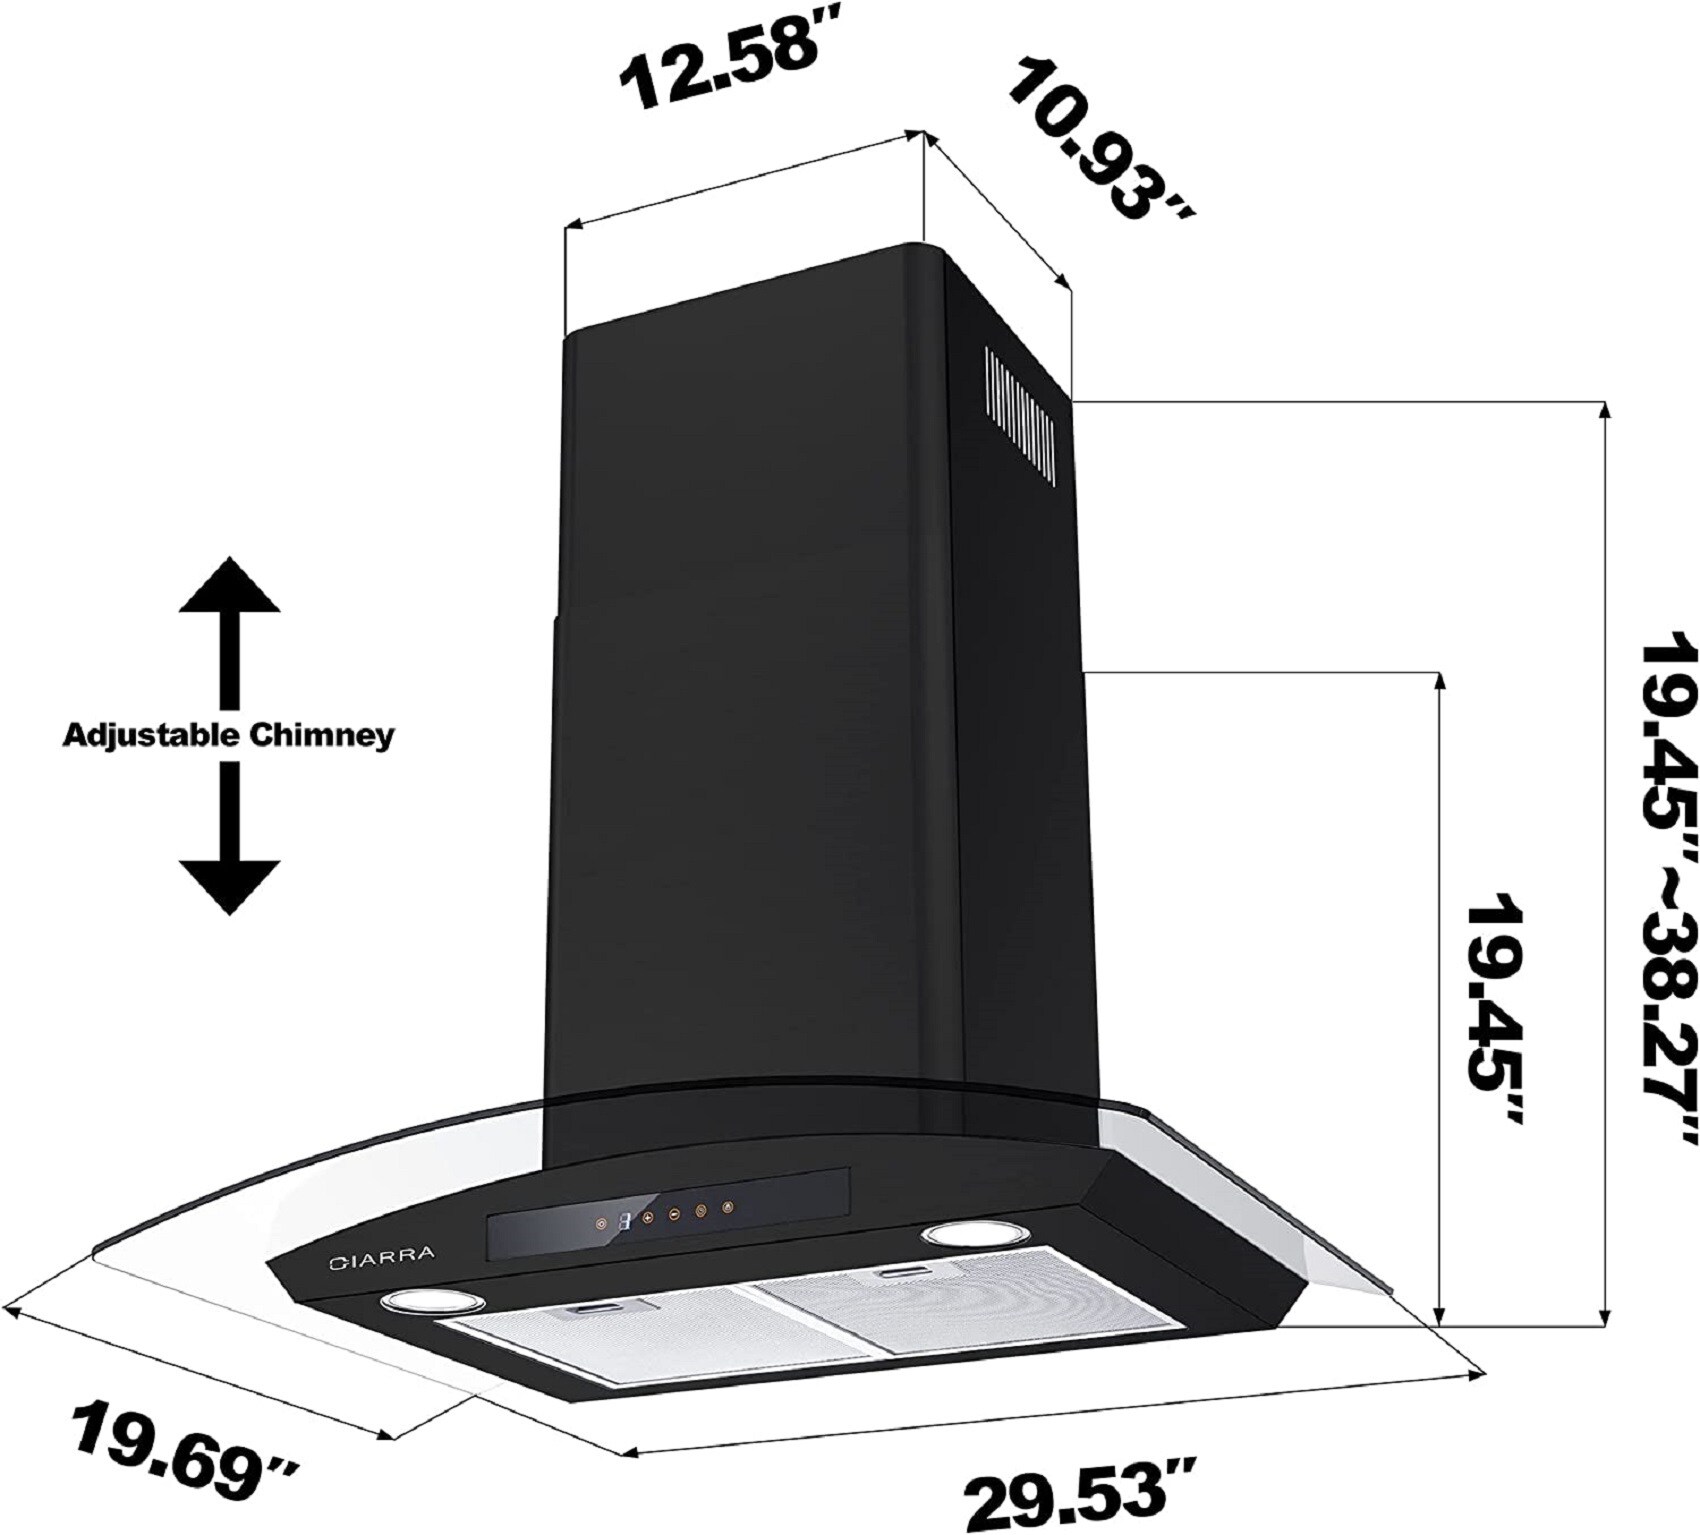 CIARRA 30-in 450-CFM Convertible Black Wall-Mounted Range Hood in the ...